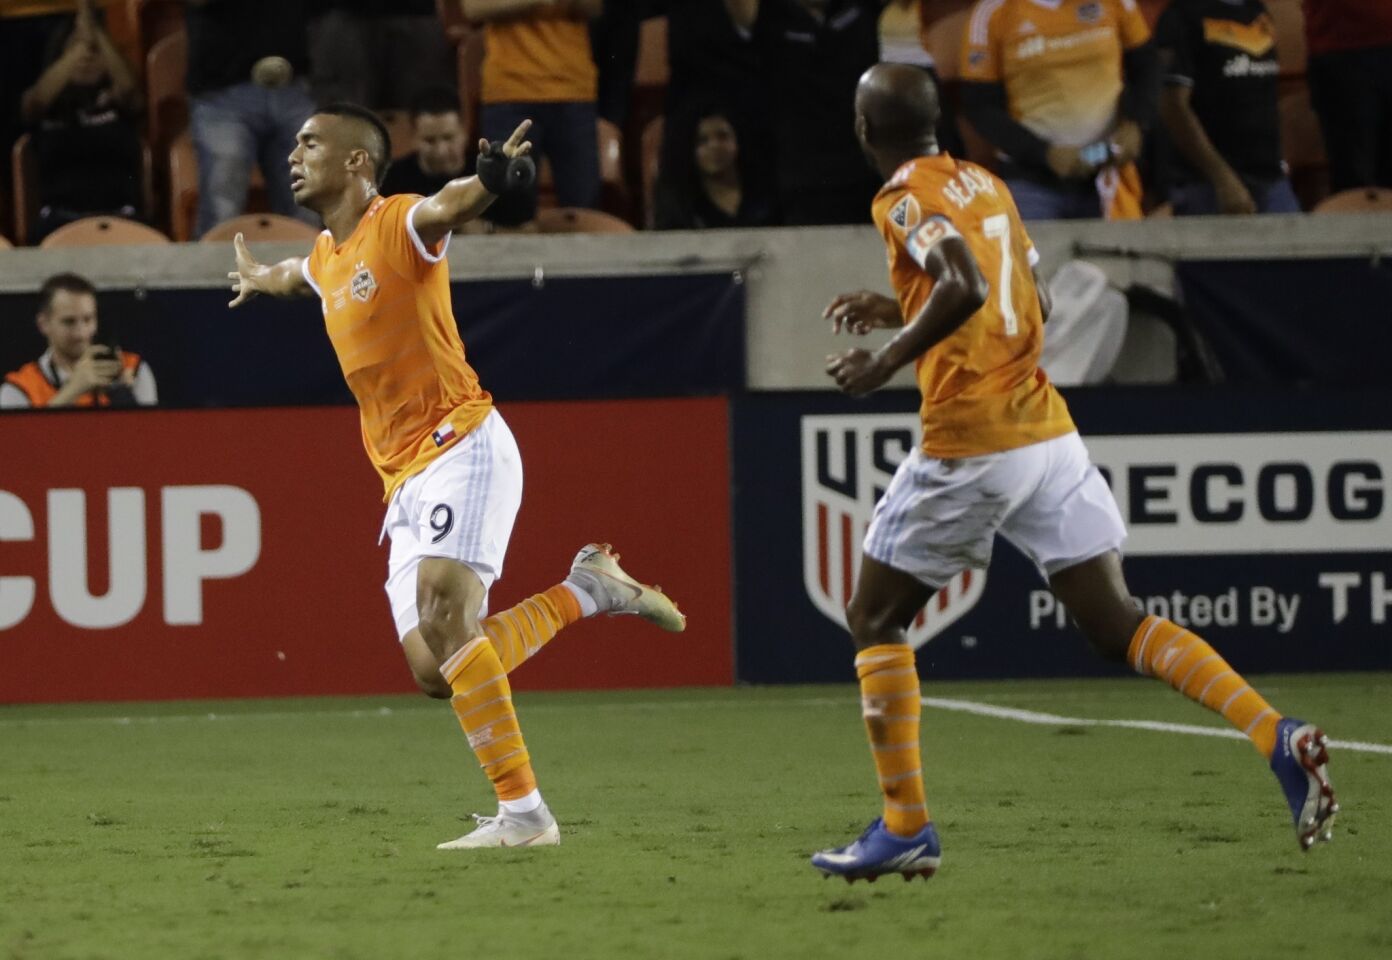 Houston Dynamo's Mauro Manotas celebrates his goal during the first half of the U.S. Open Cup championship soccer match against the Philadelphia Union Wednesday, Sept. 26, 2018, in Houston. (AP Photo/David J. Phillip)